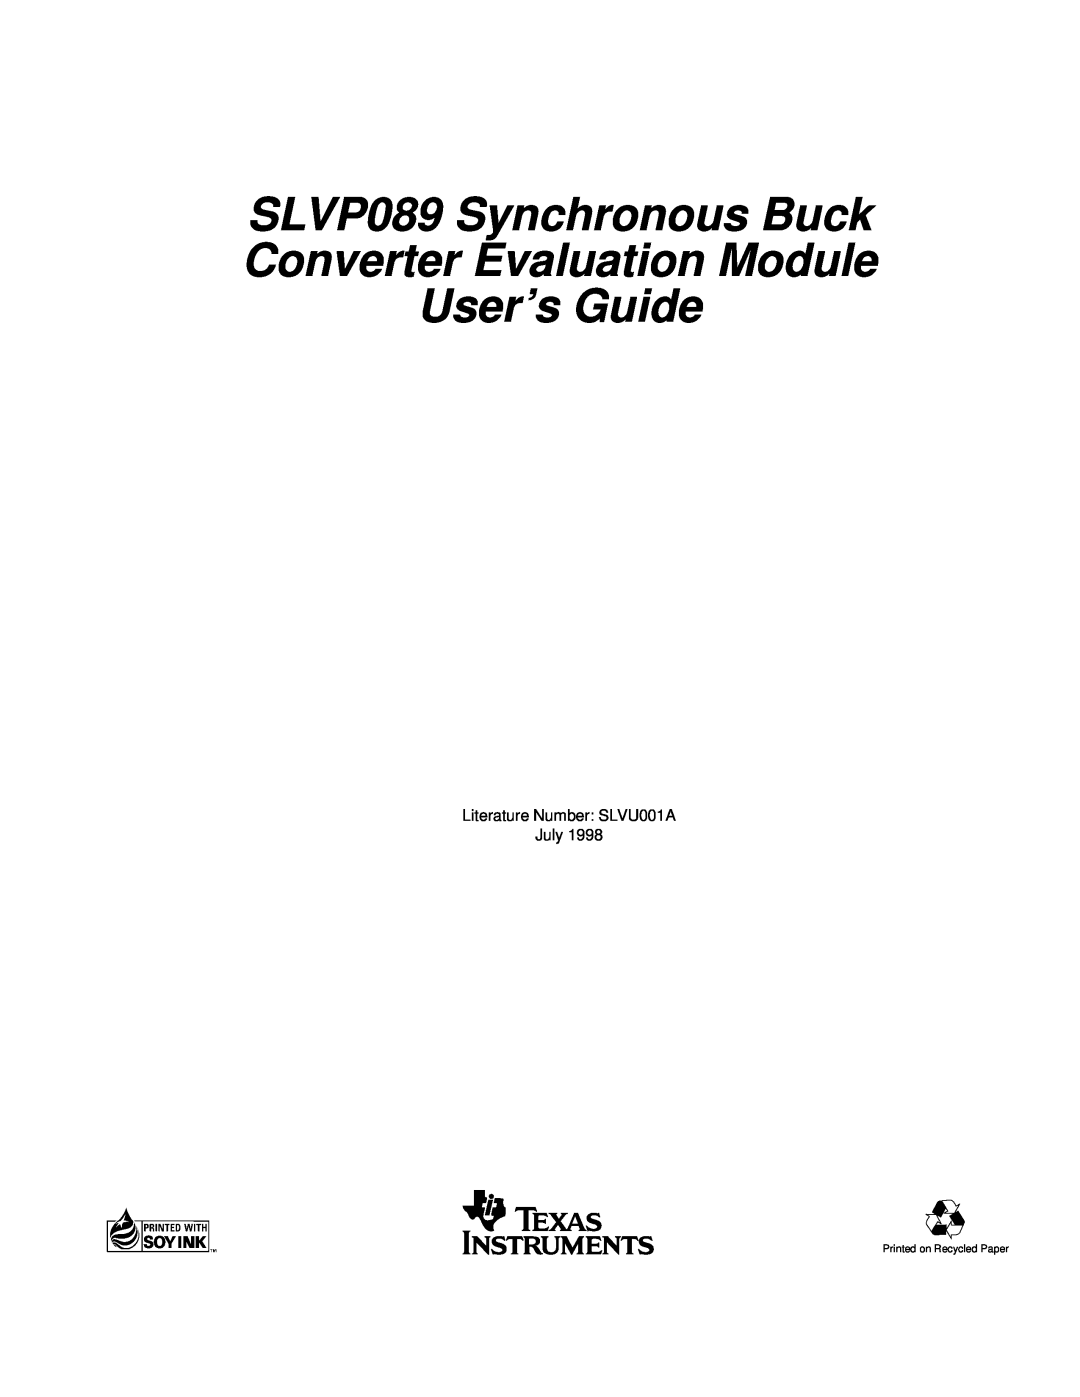 Texas Instruments SLVP089 Synchronous Buck Converter Evaluation Module User’s Guide, Literature Number SLVU001A July 